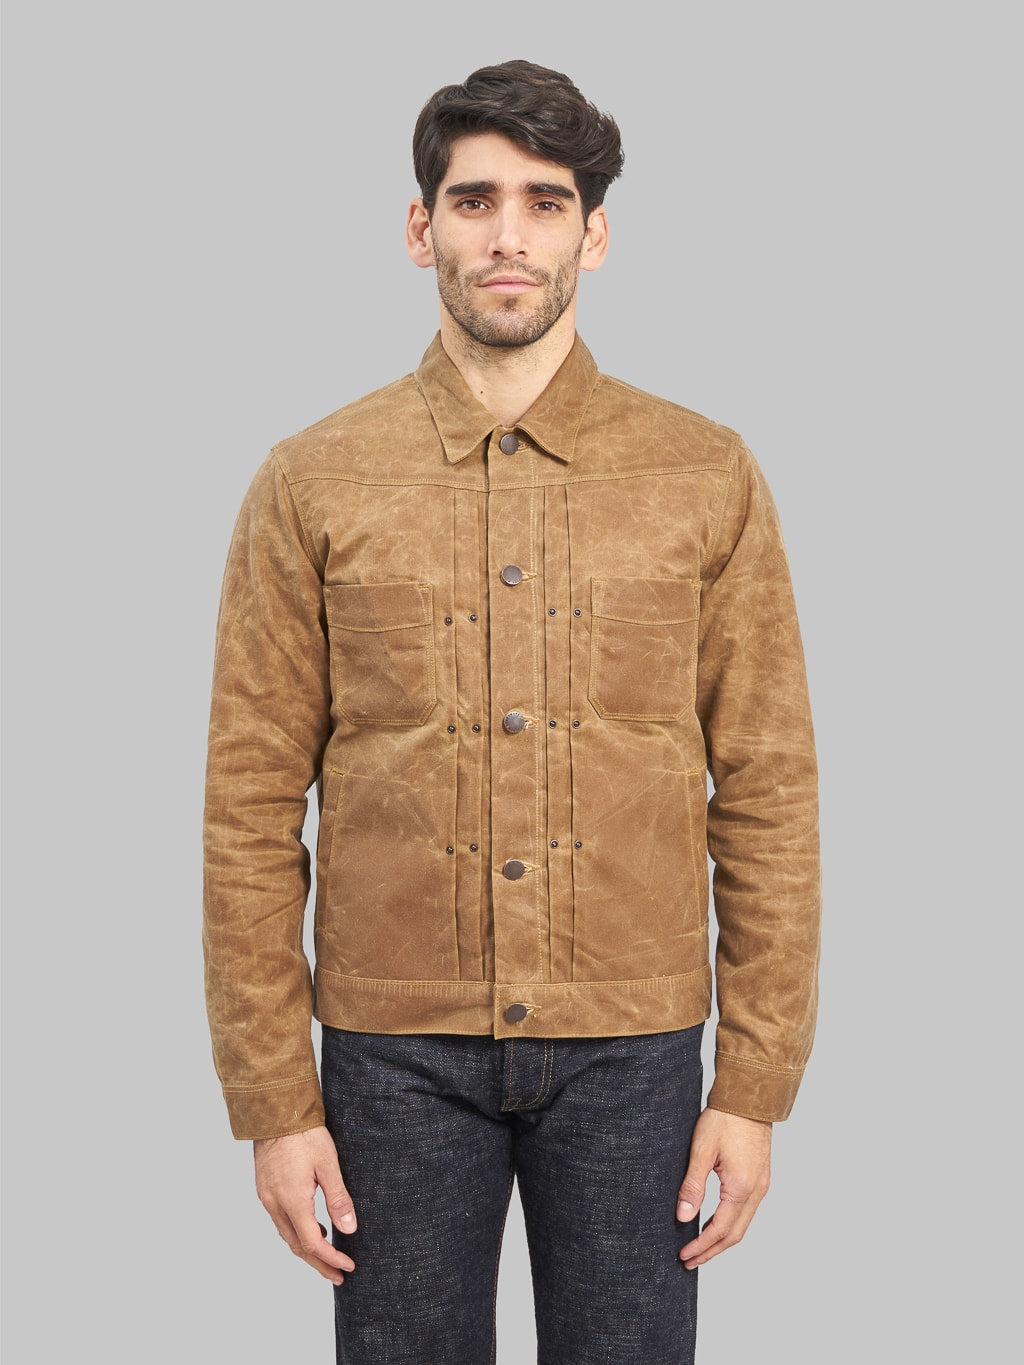 Freenote Cloth Riders Jacket Waxed Canvas Rust model front fit